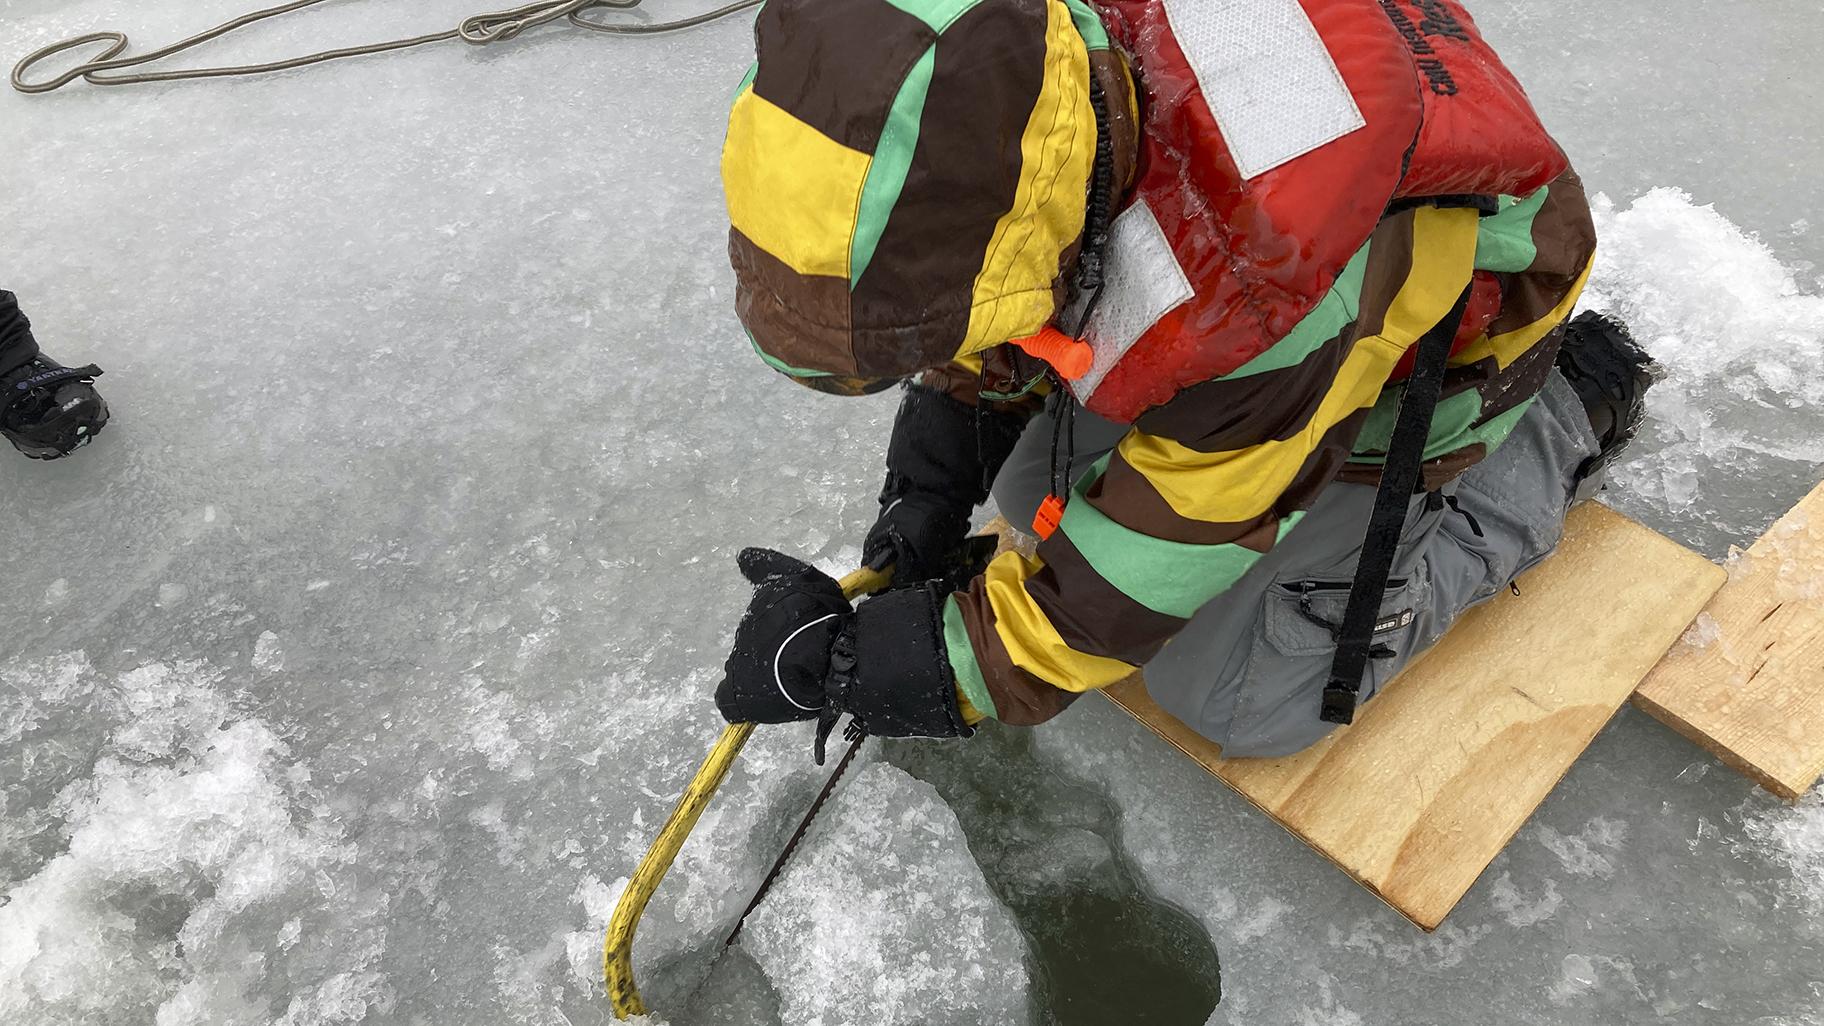 Matt Sand, wetland field crew leader for the Great Lakes Restoration Initiative, saws into the frozen surface of Lake Huron’s Saginaw Bay on Tuesday, Feb. 22, 2022 in Standish, Mich. (AP Photo / Mike Householder)